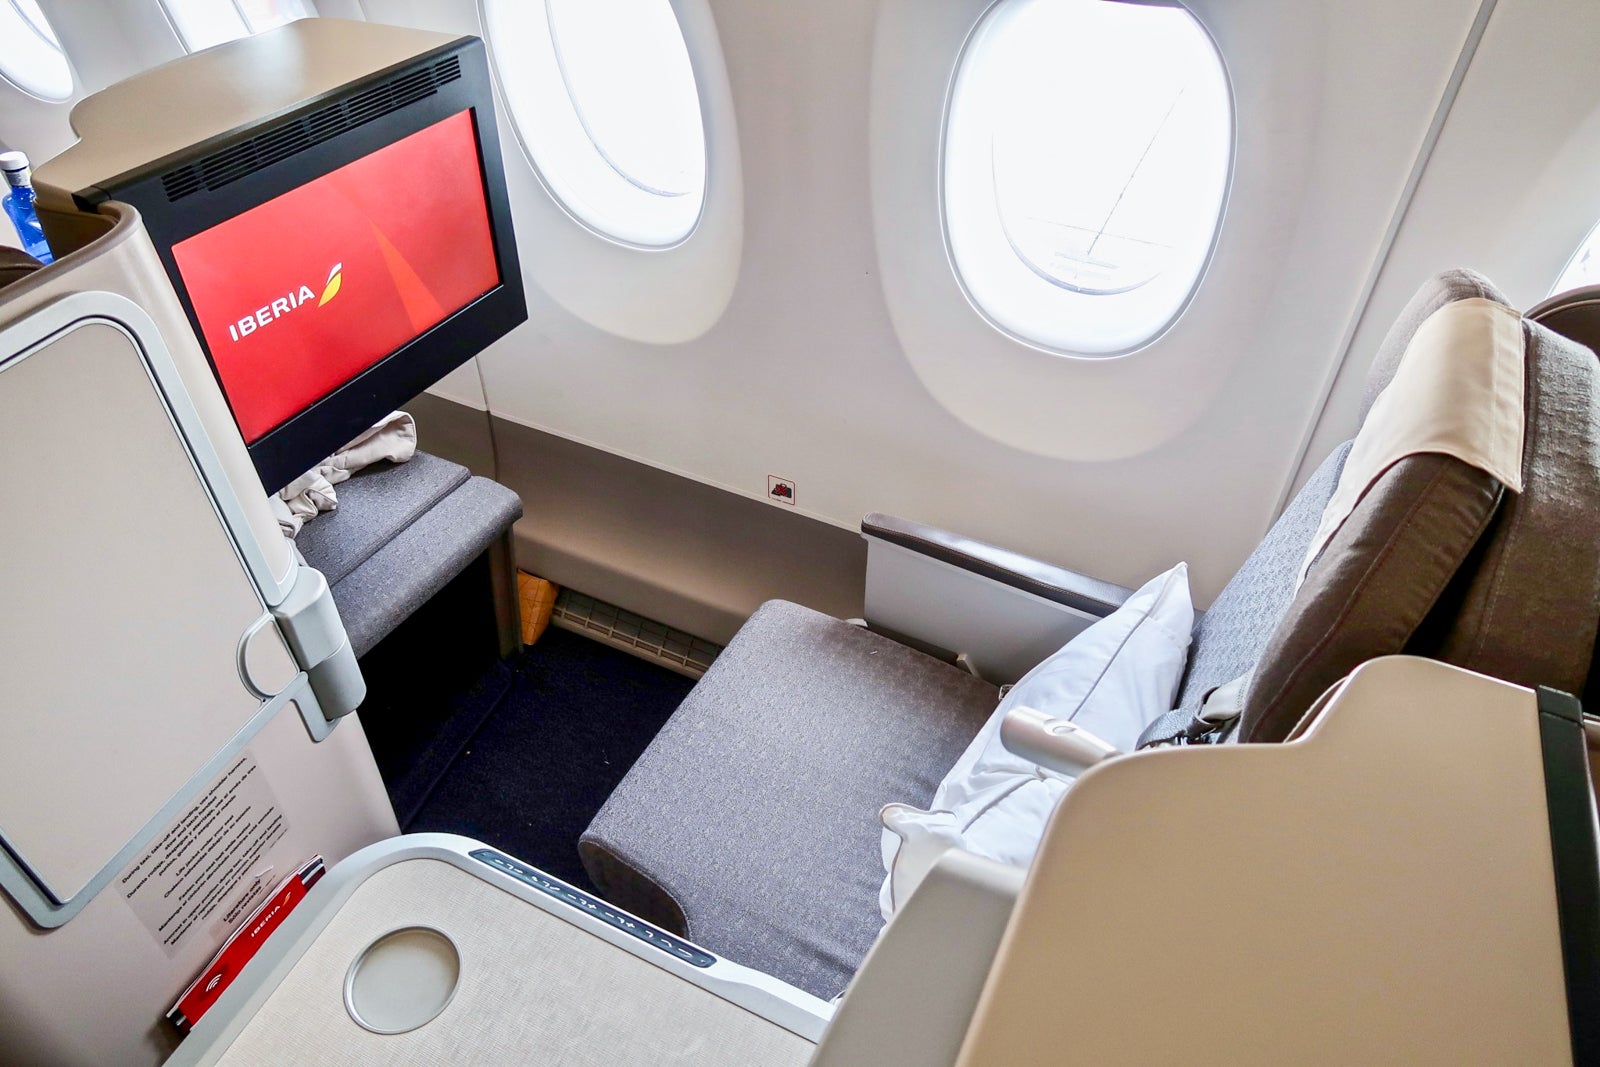 Iberia's A350 business class product from above